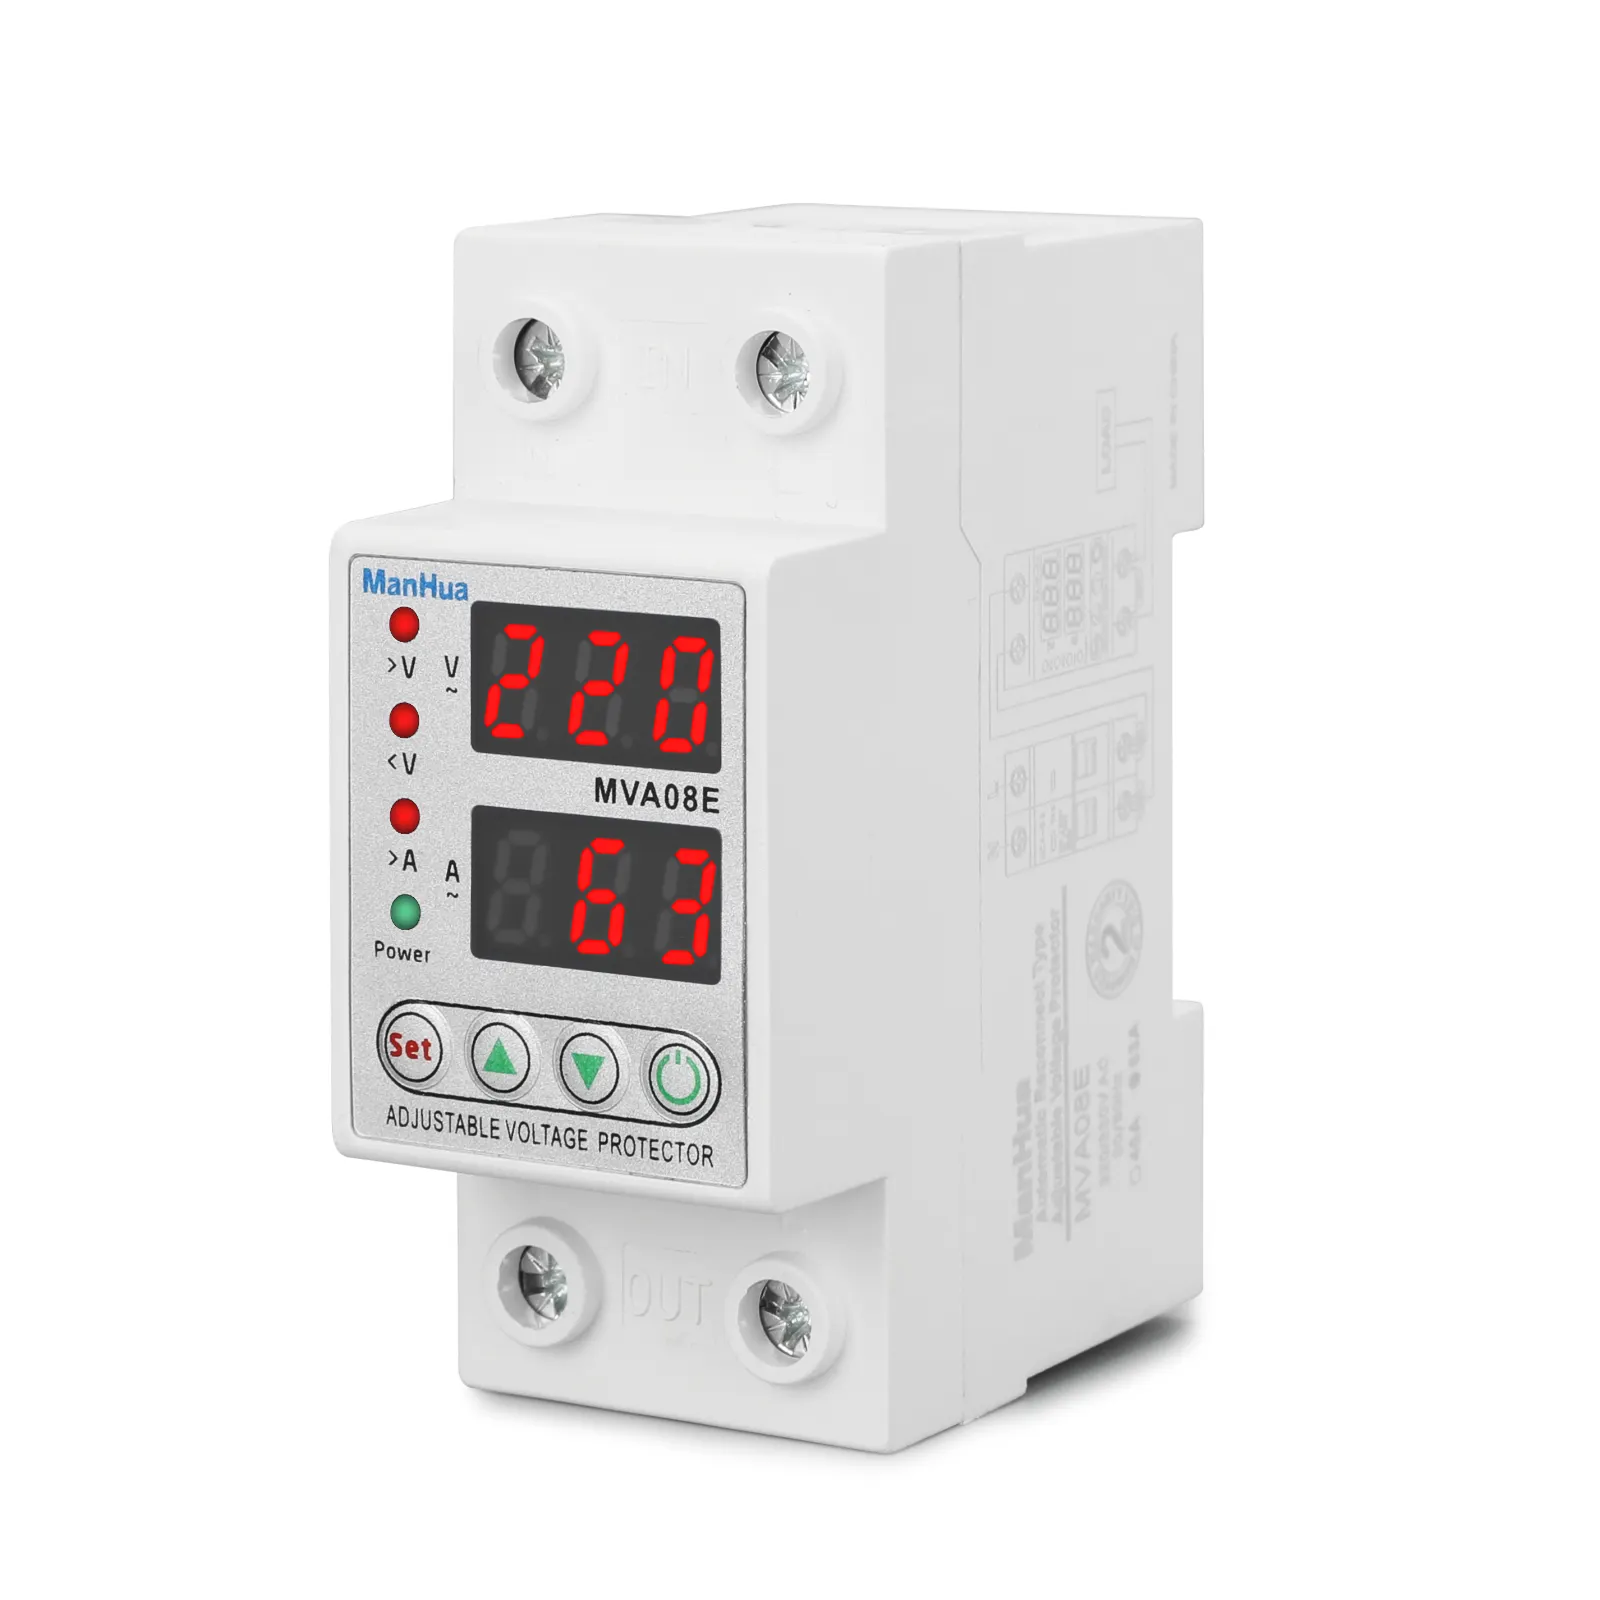 Manhua MVA08E 220V intelligent digital overvoltage 63A HD touch display  undervoltage protector relay reset protection